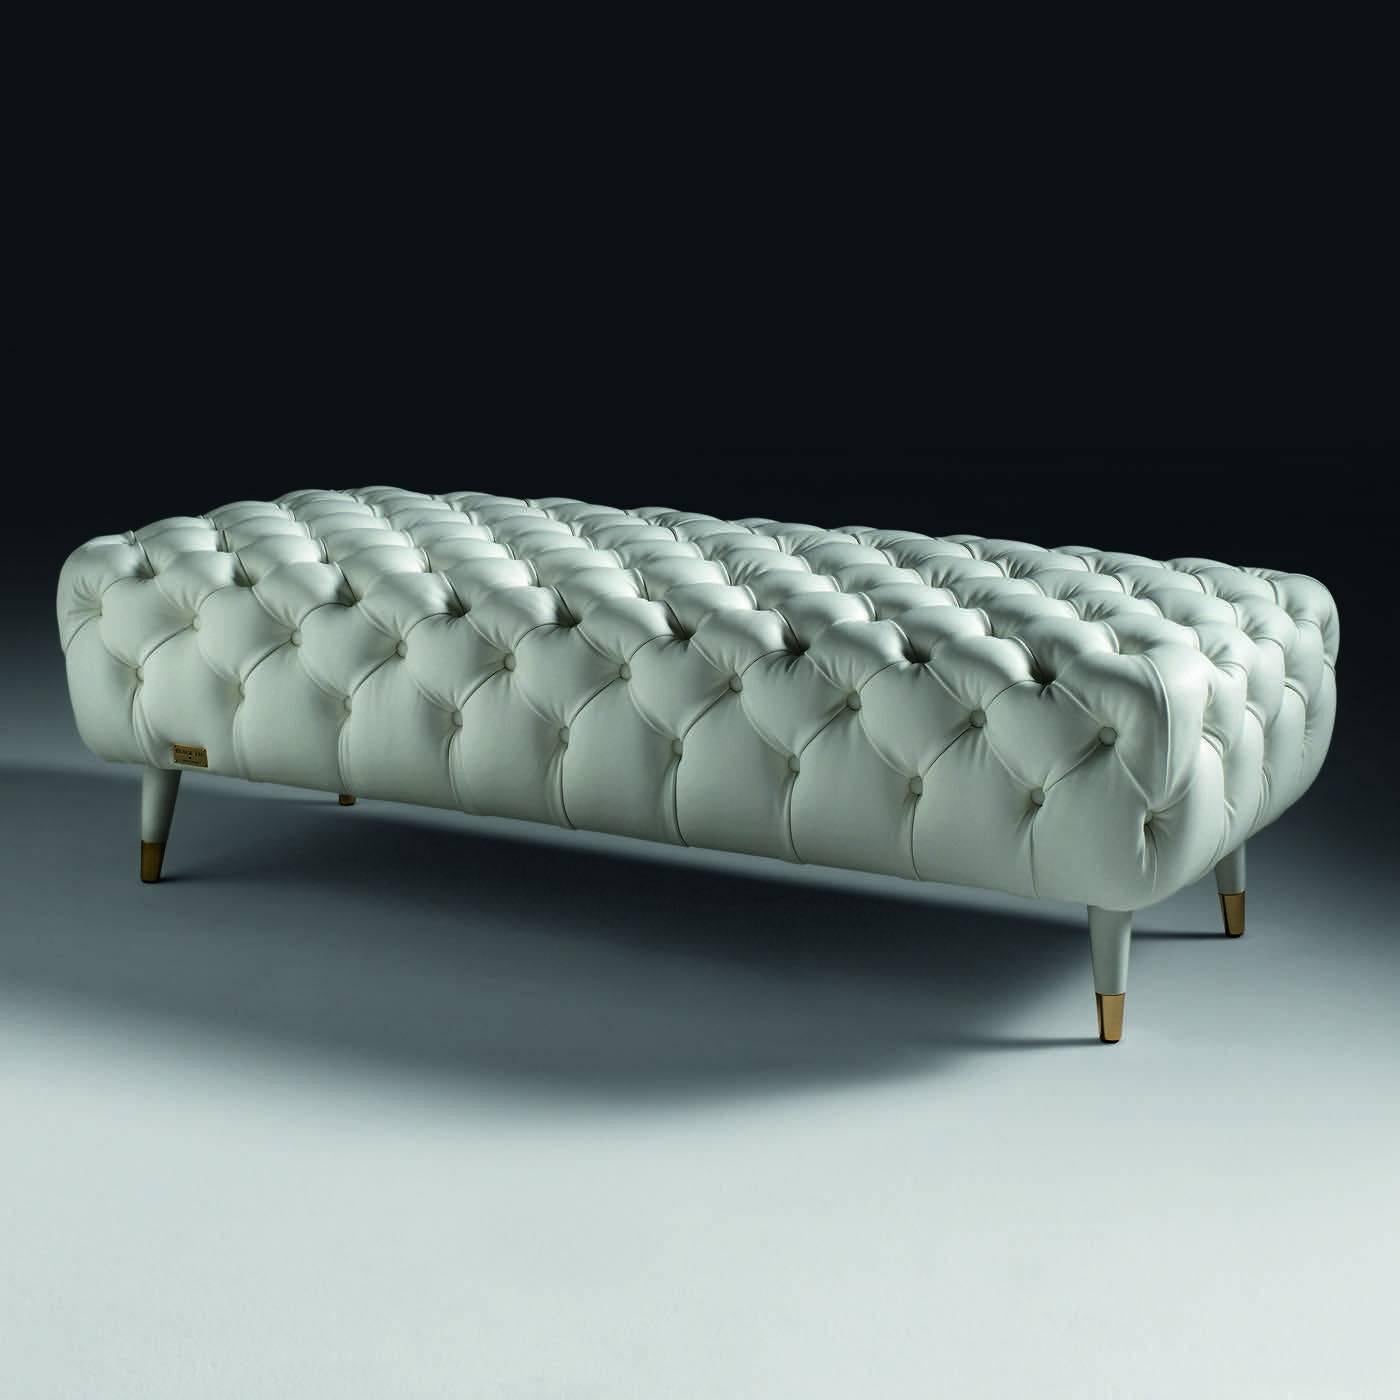 This exquisite ottoman in spruce and beechwood has padding in polyurethane foam. The elegant white cover is not removable and can be in button-padded fabric or leather. The feet are covered in polished brass.